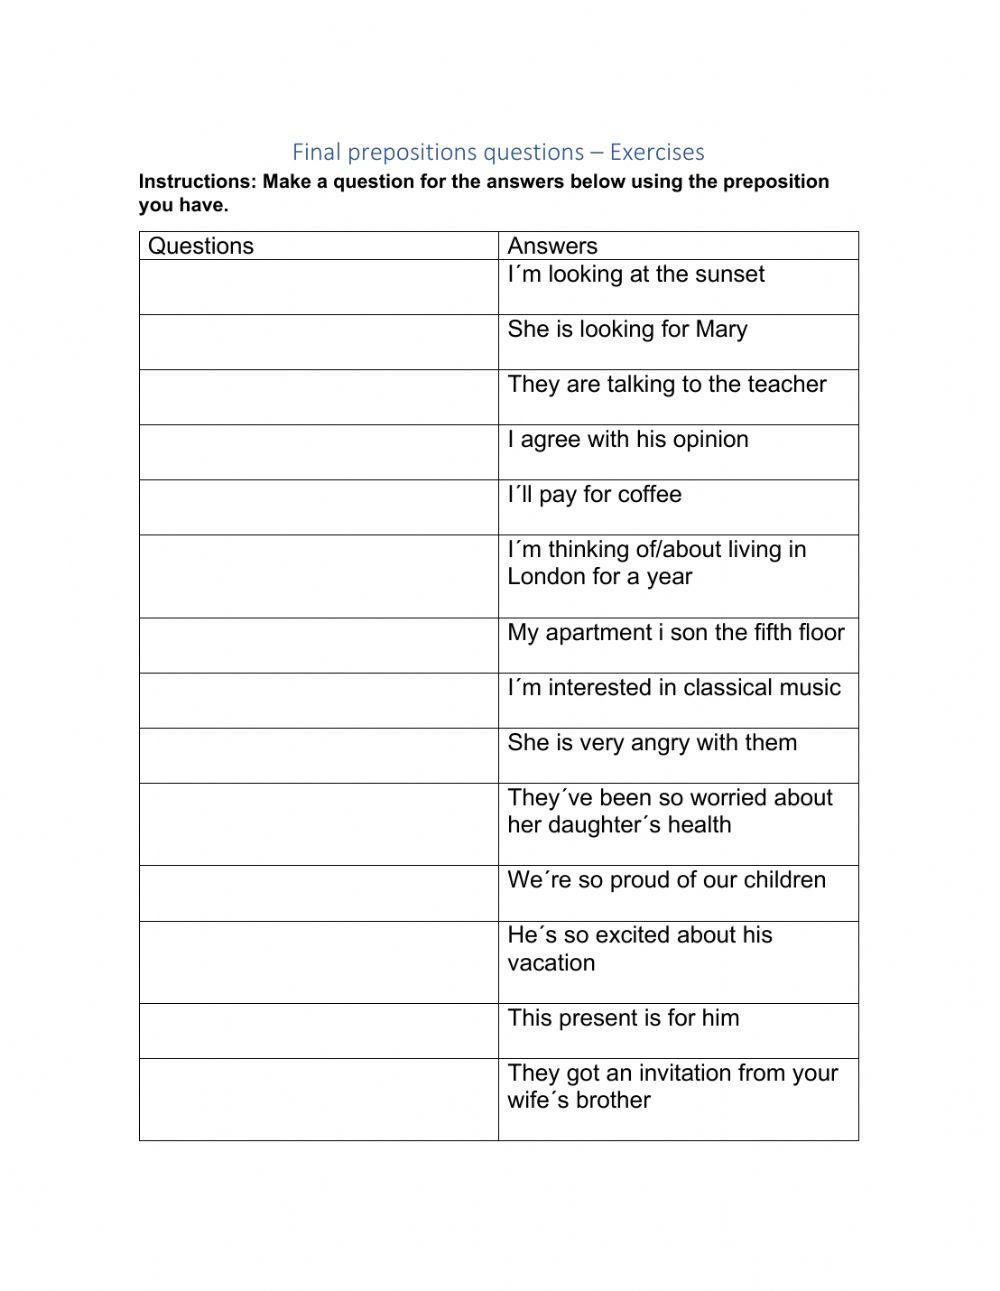 Prepositions at the end of a question